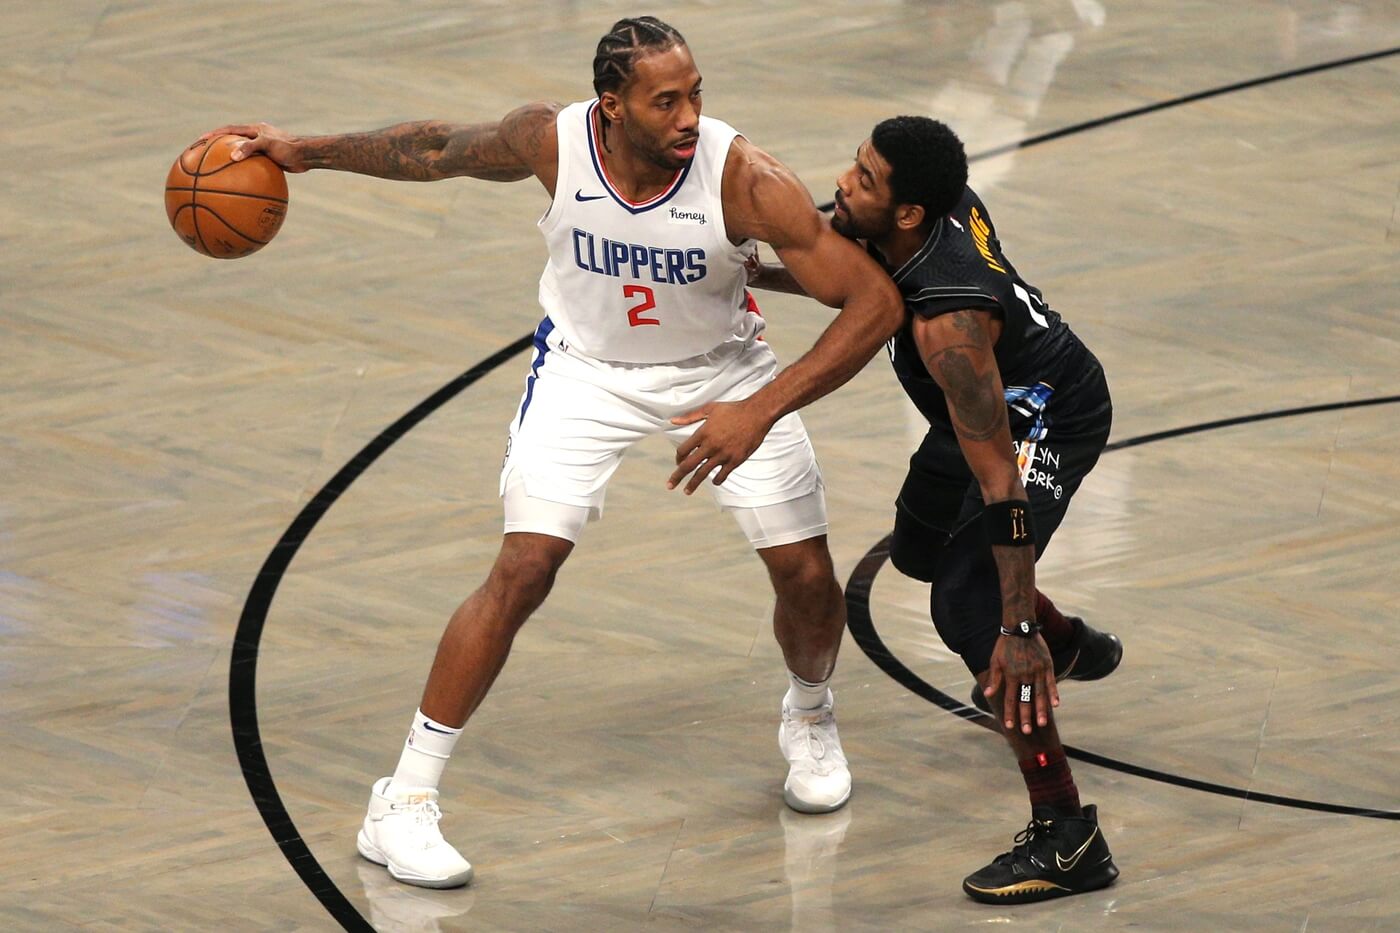 Feb 2, 2021; Brooklyn, New York, USA; Los Angeles Clippers small forward Kawhi Leonard (2) controls the ball against Brooklyn Nets point guard Kyrie Irving (11) during the first quarter at Barclays Center. Mandatory Credit: Brad Penner-USA TODAY Sports